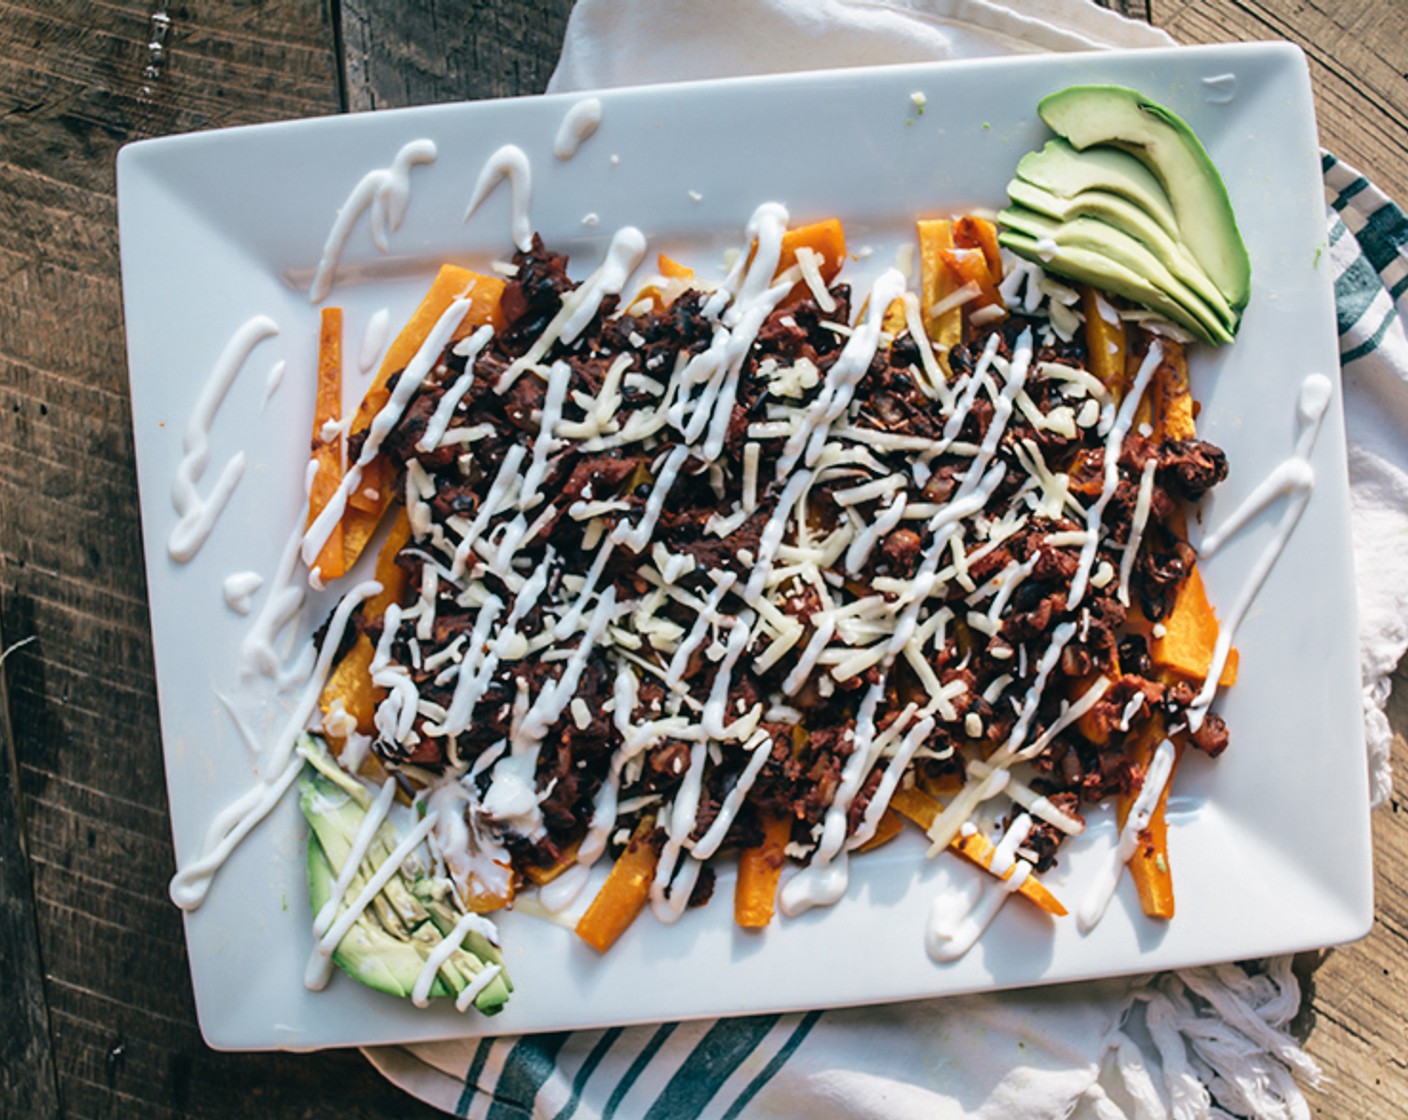 step 6 Once fries are cooked and have cooled for a minute, layer them on large platter or two separate plates and top with black bean vegetarian chili mixture.  Sprinkle with Shredded Cheddar Cheese (1/4 cup), drizzle with Sour Cream (2 Tbsp)) and garnish with sliced Avocado (1/2).